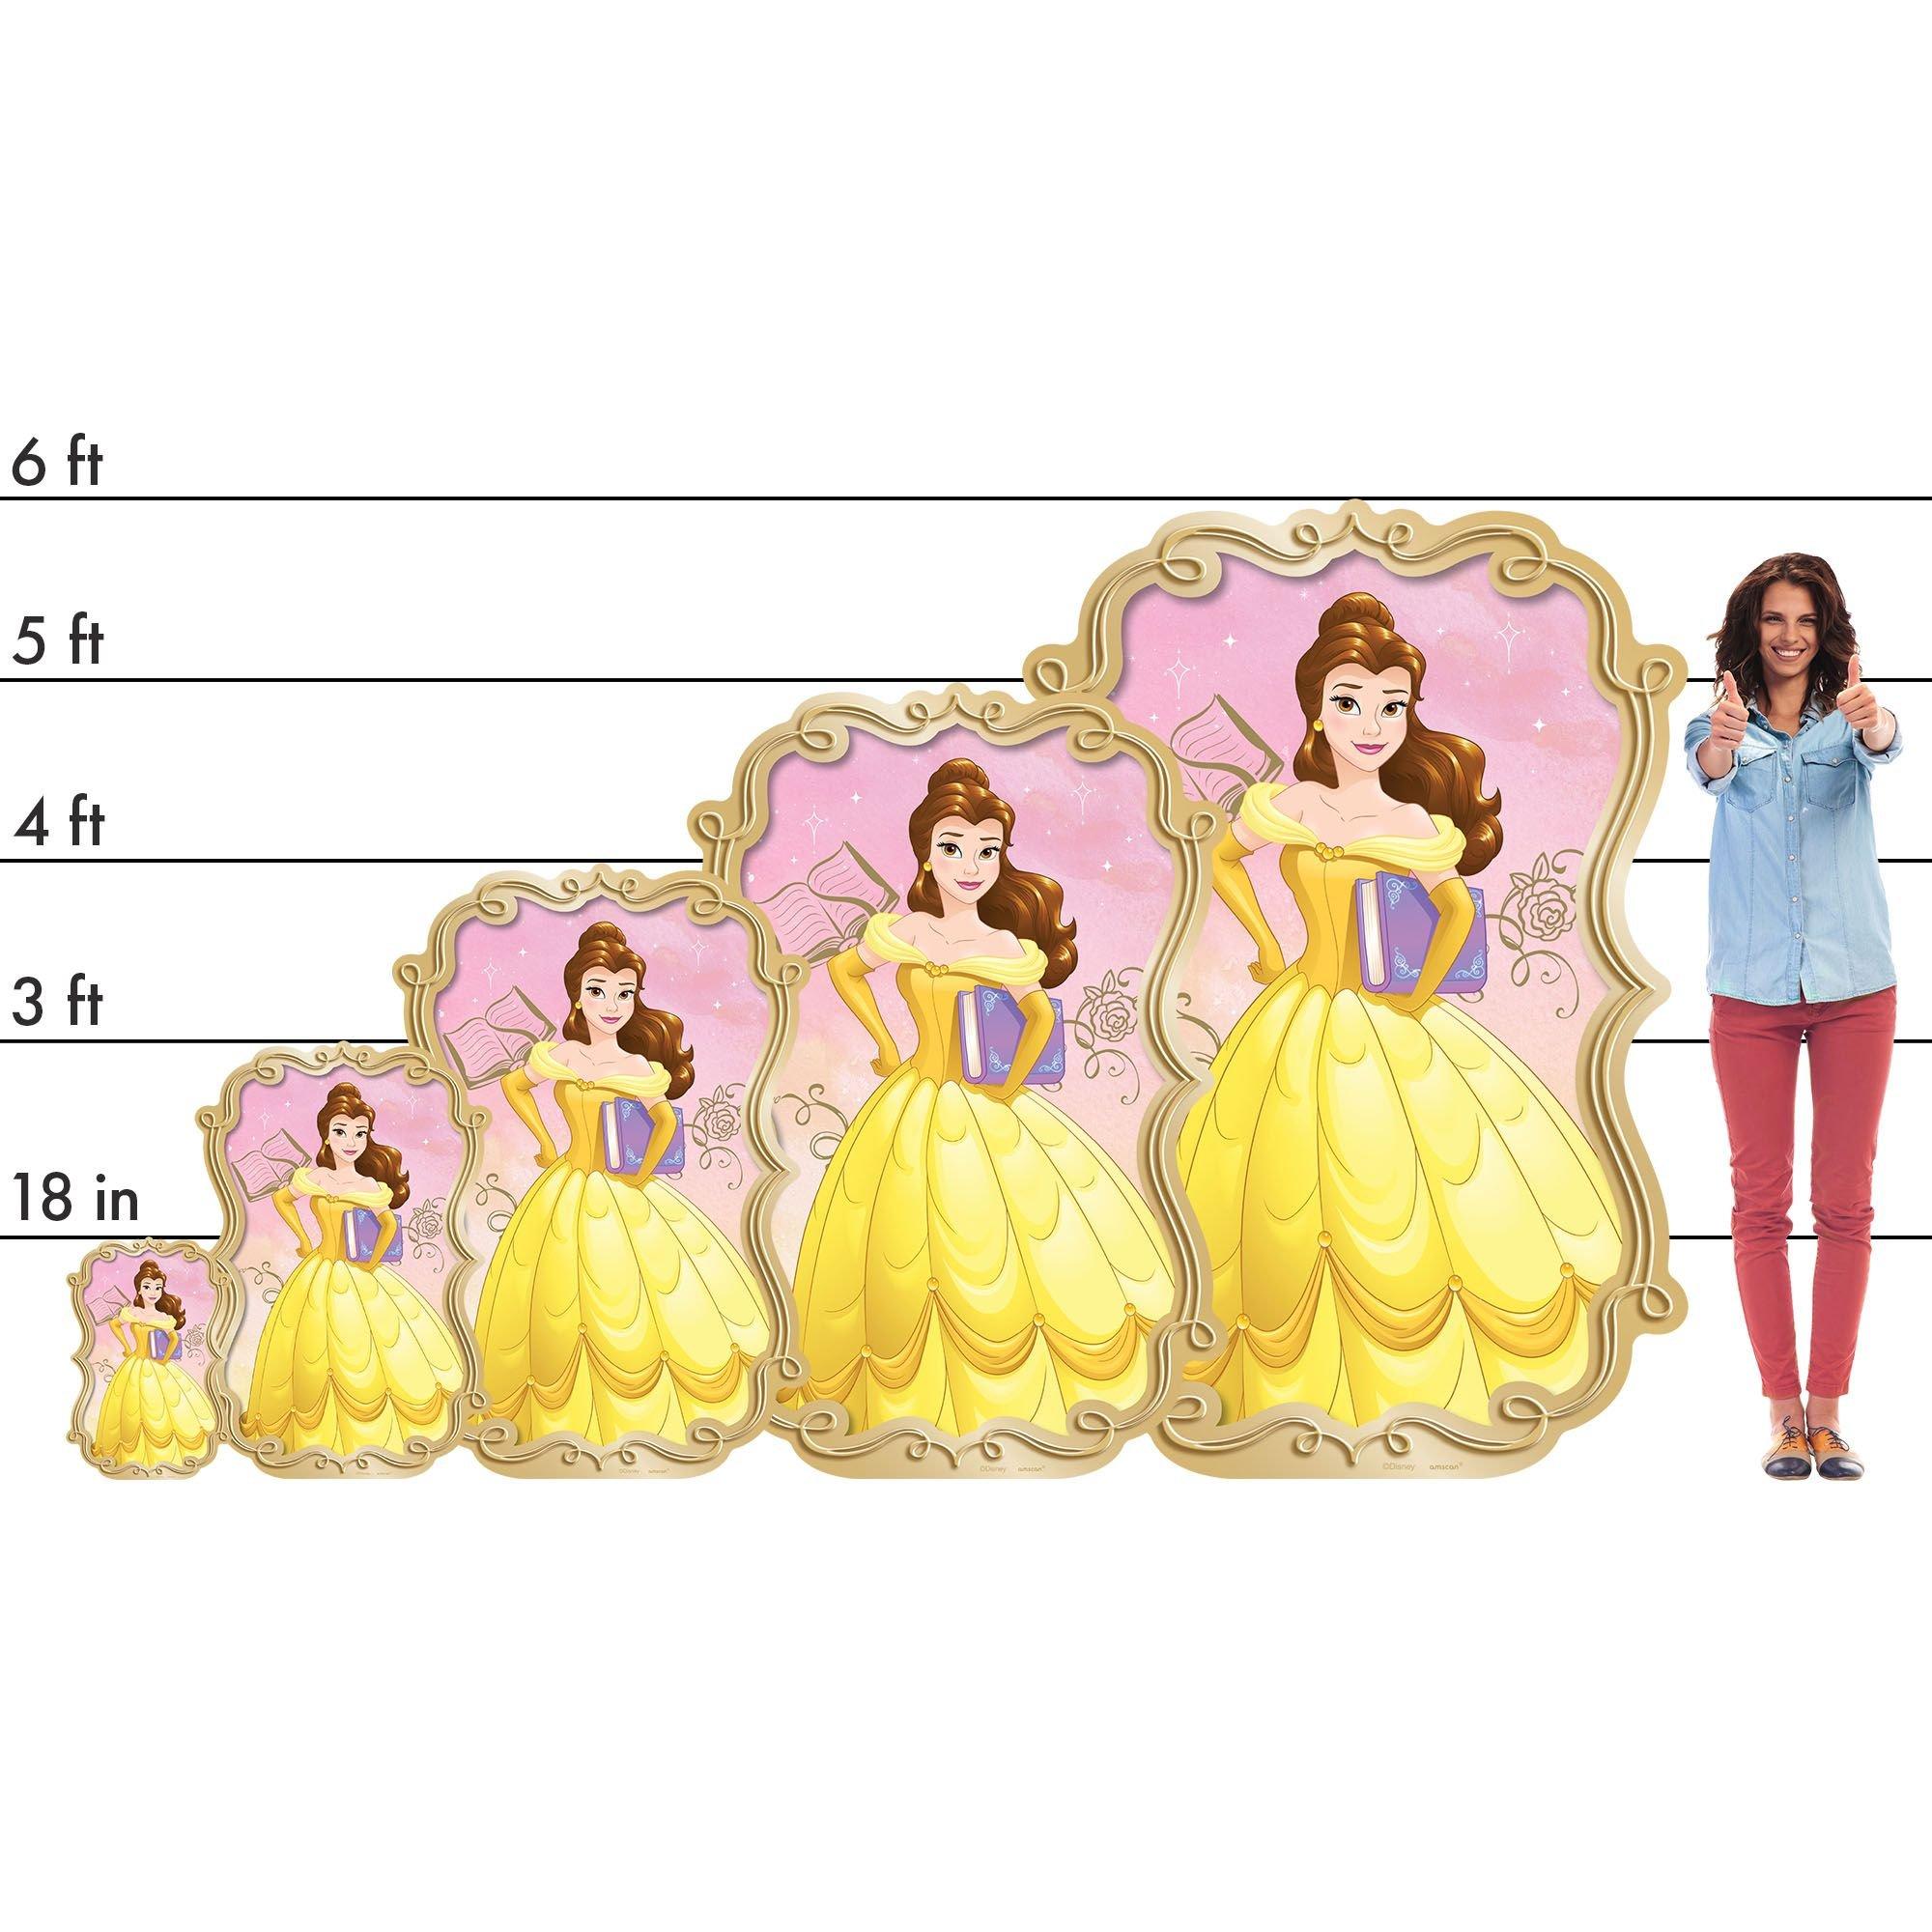 Belle Life-Size Cardboard Cutout, 6ft - Beauty and the Beast